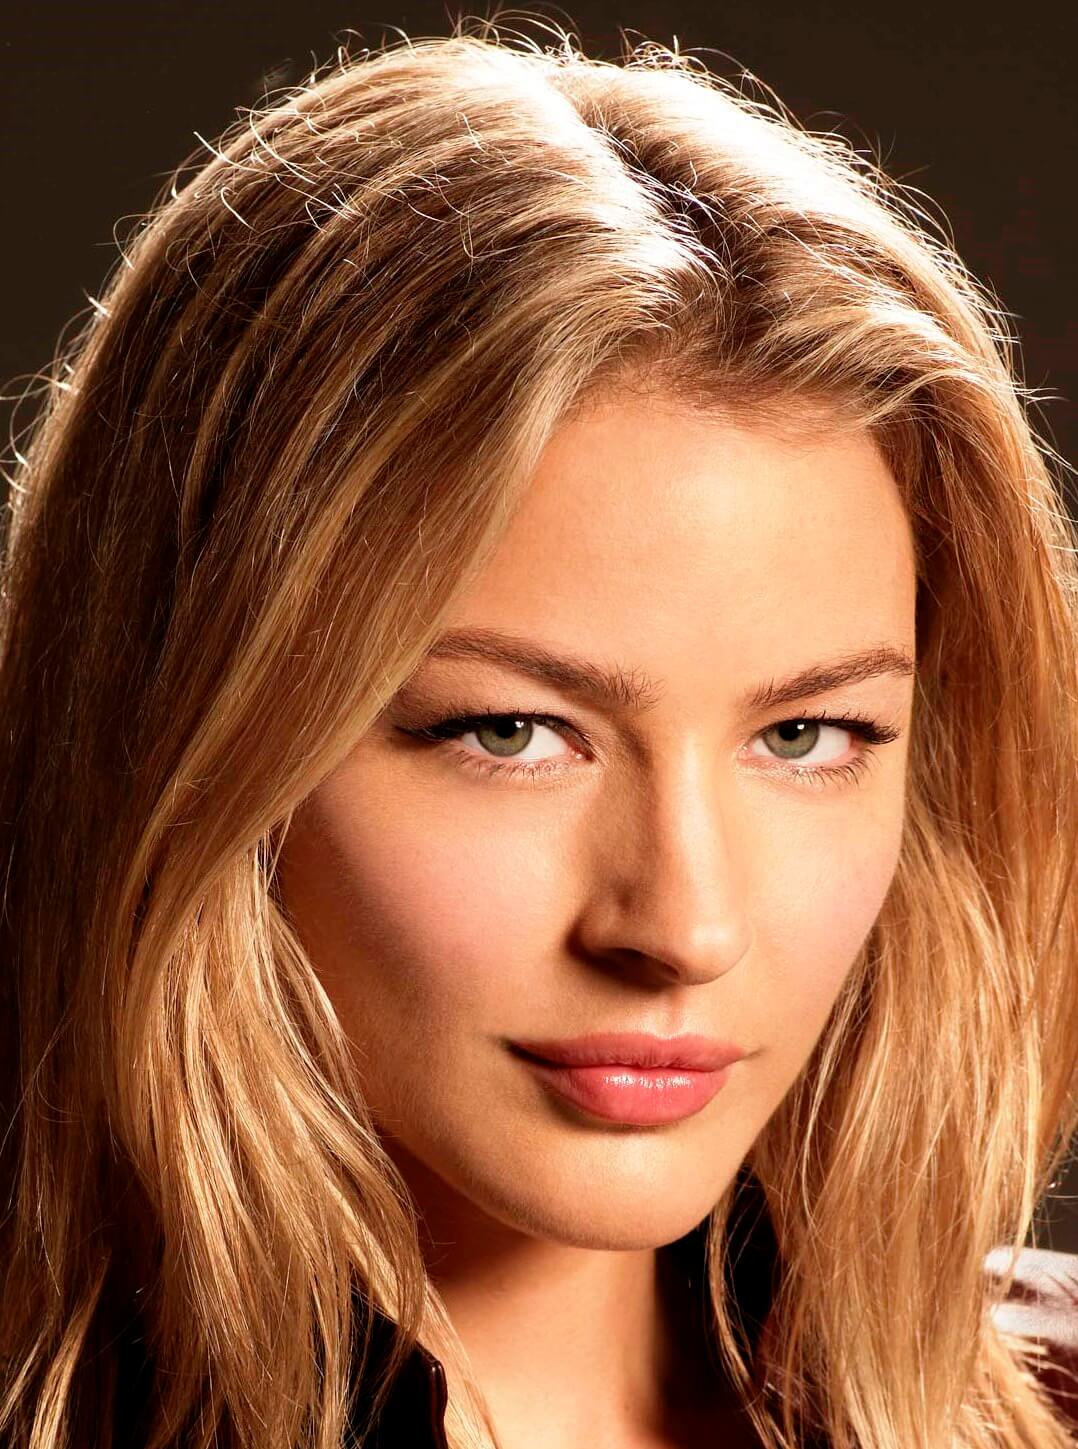 Tabrett Bethell Addresses, Phone and Fan mail